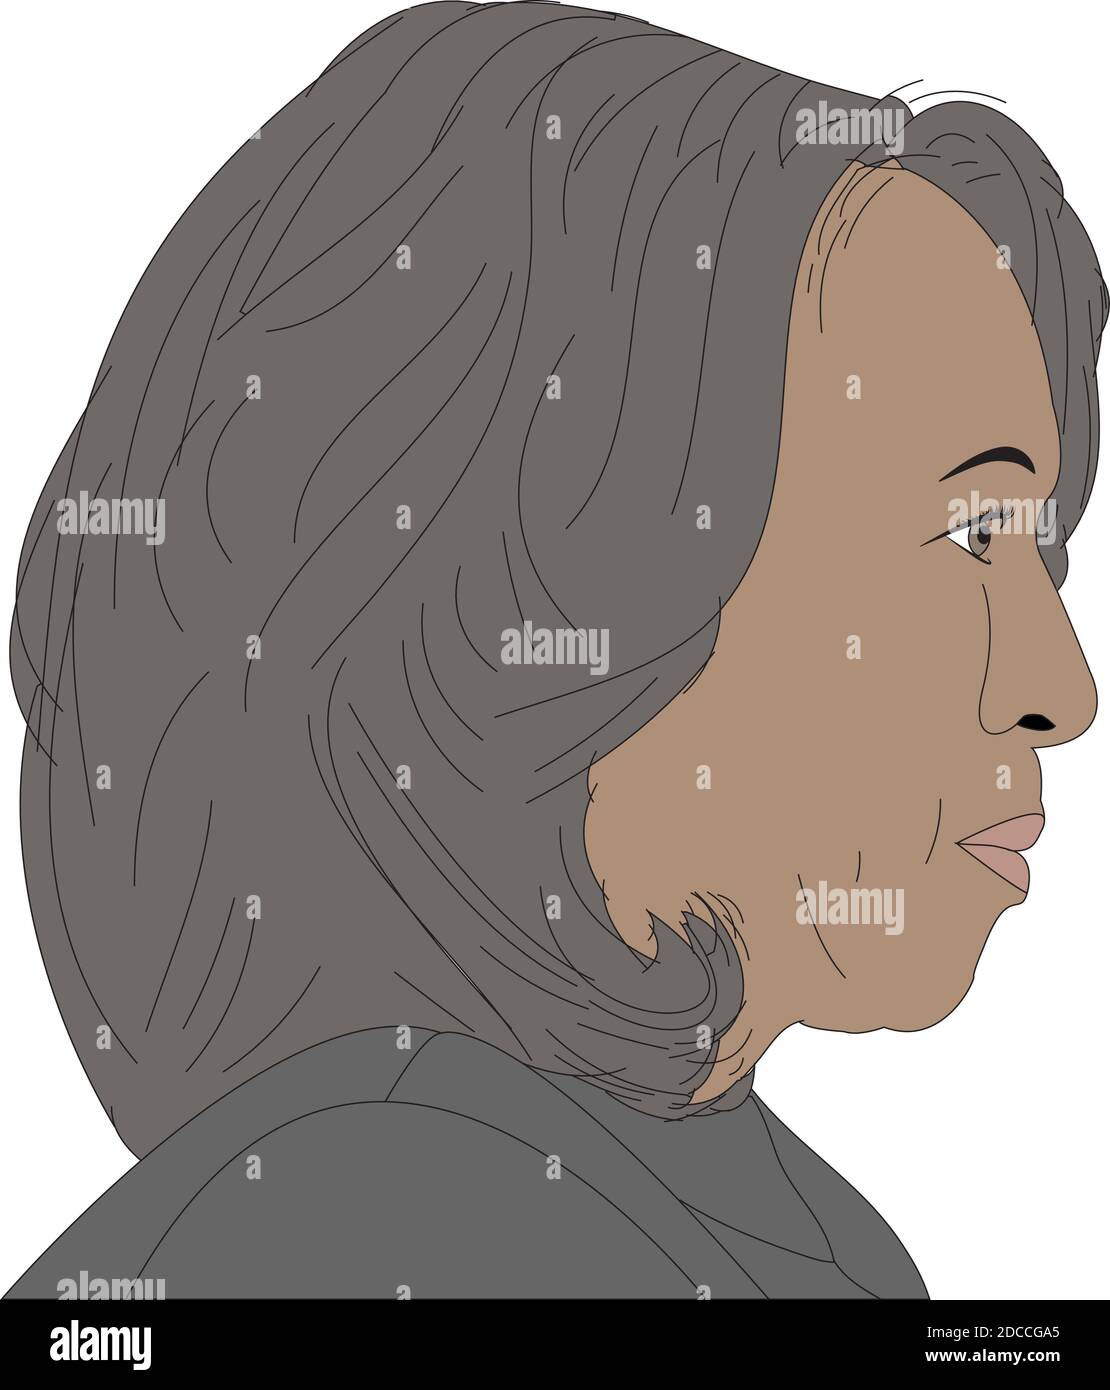 Worlds Leaders Vector Illustration of Kamala Harris - US Vice President-elect of United States of America, USA 2020 Stock Vector